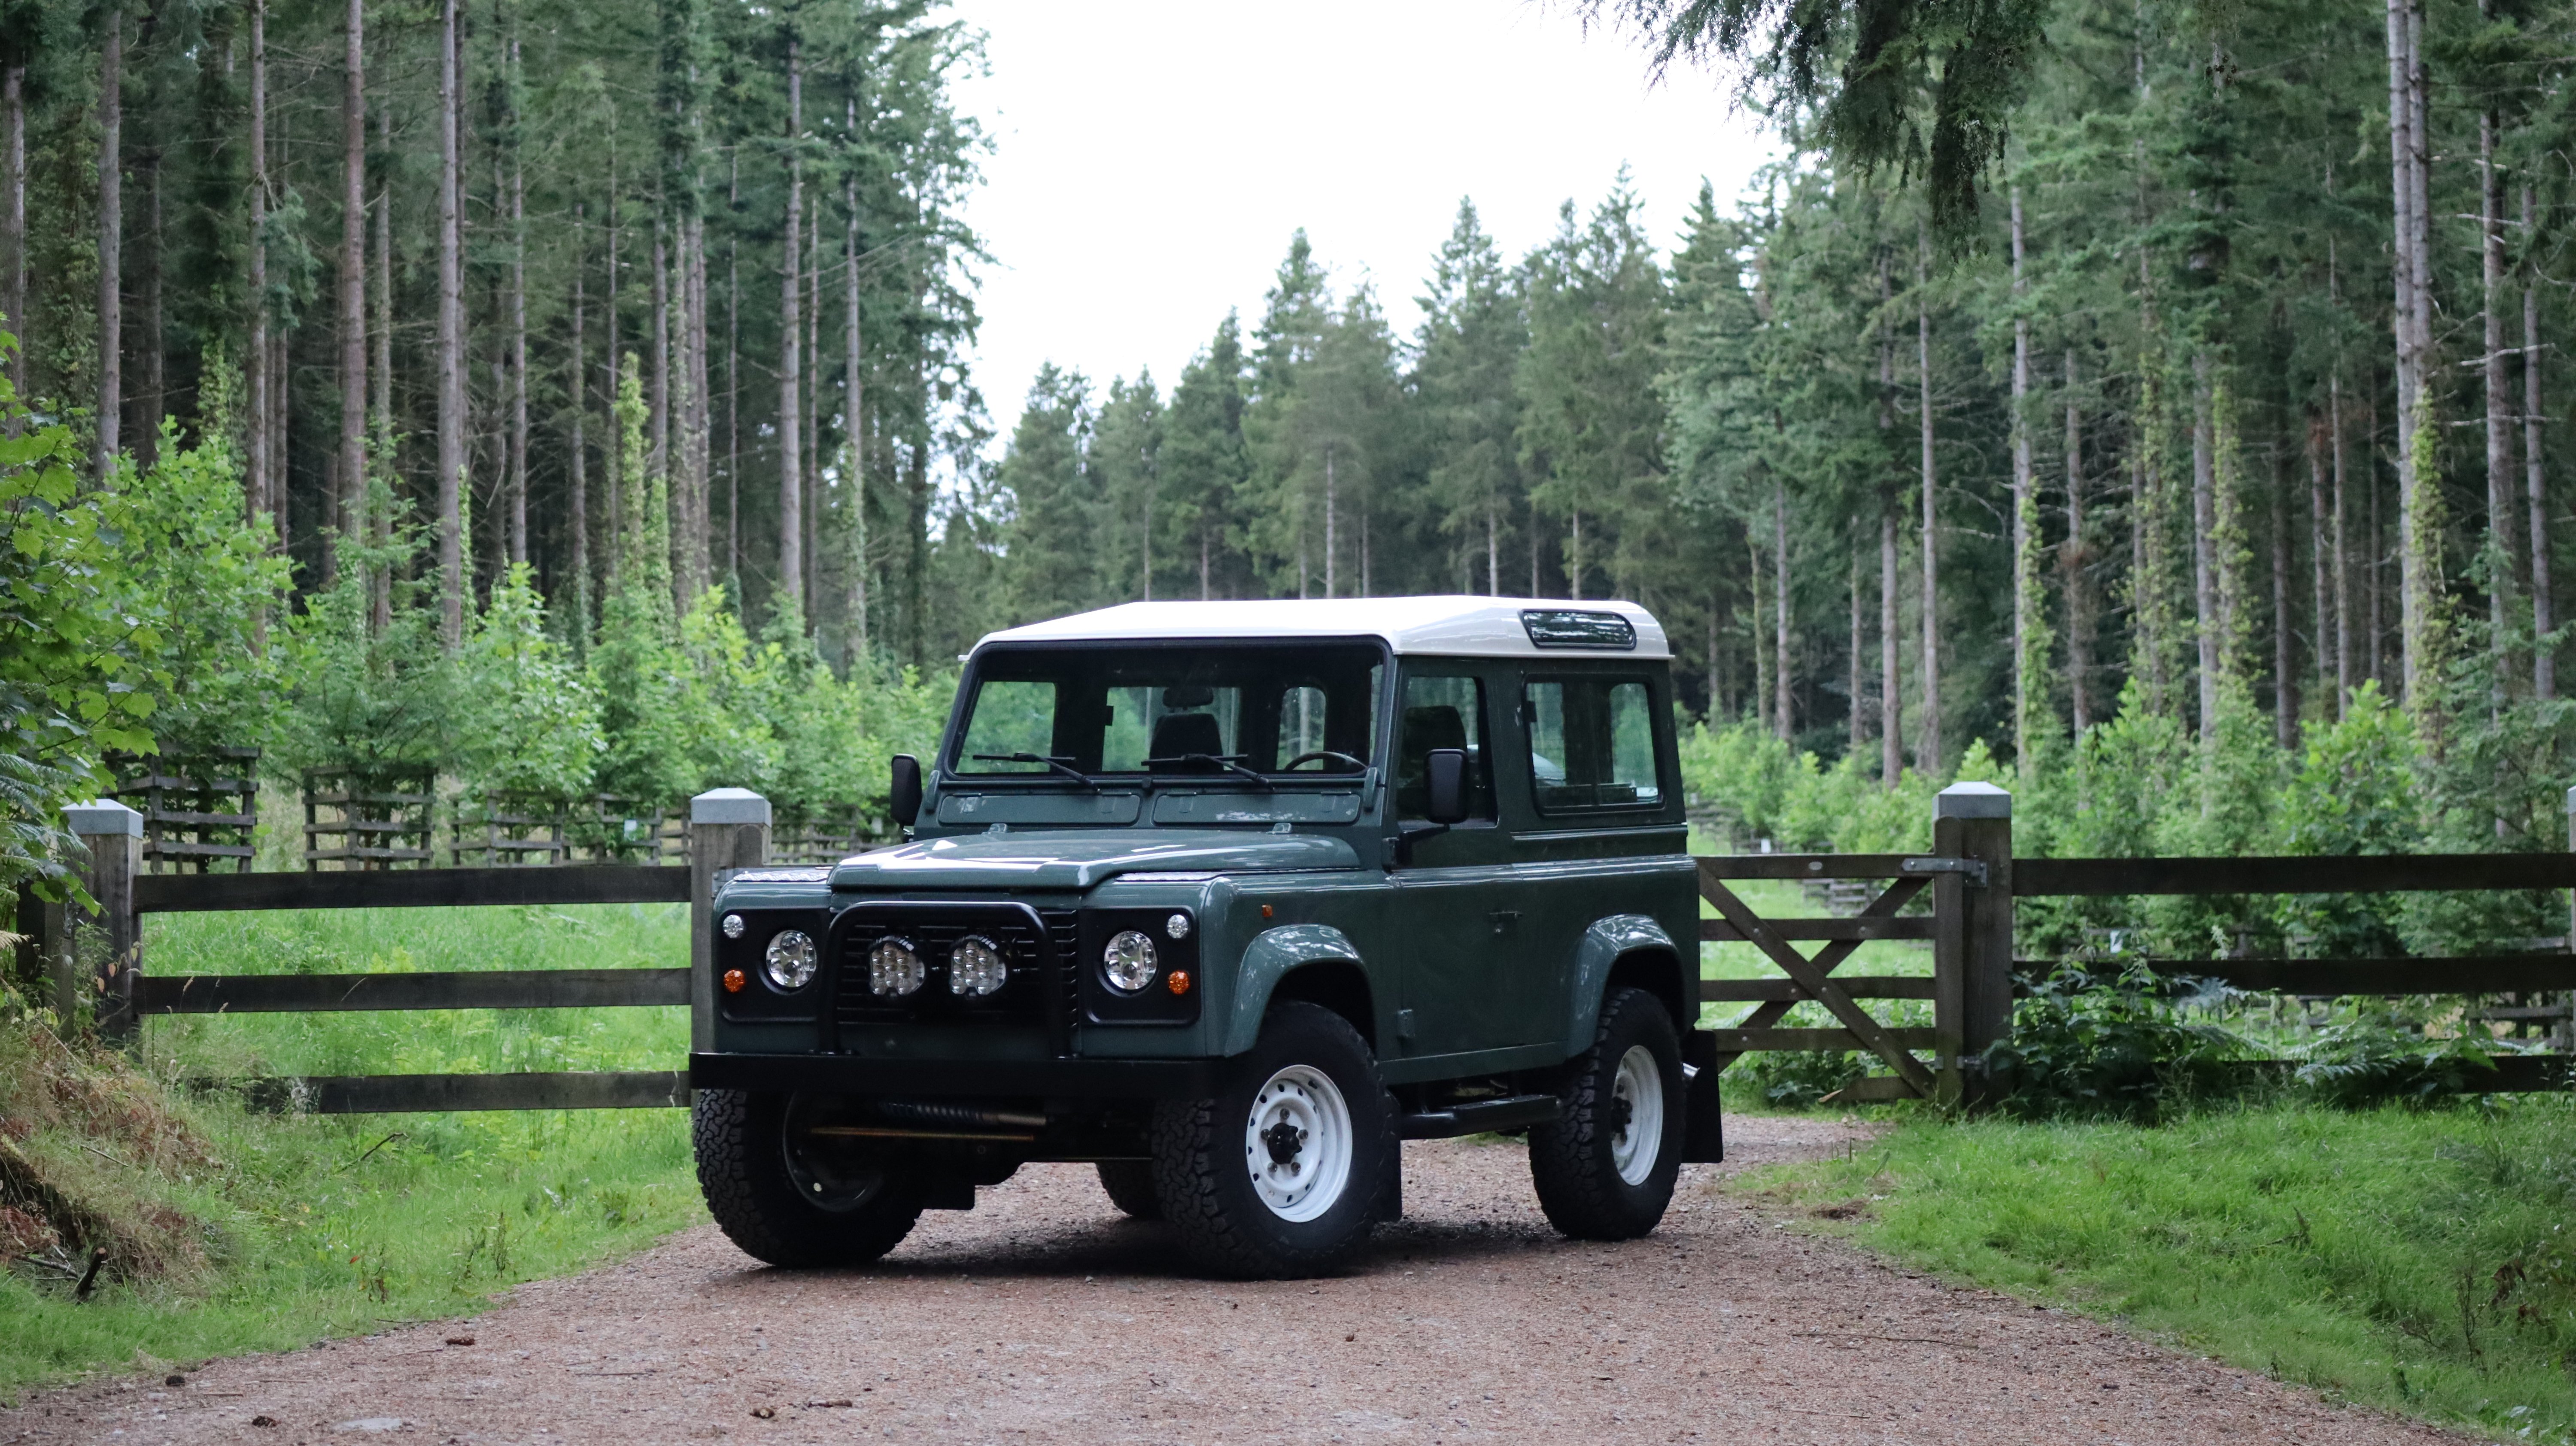 Restoring Vintage Land Rovers to Perfection